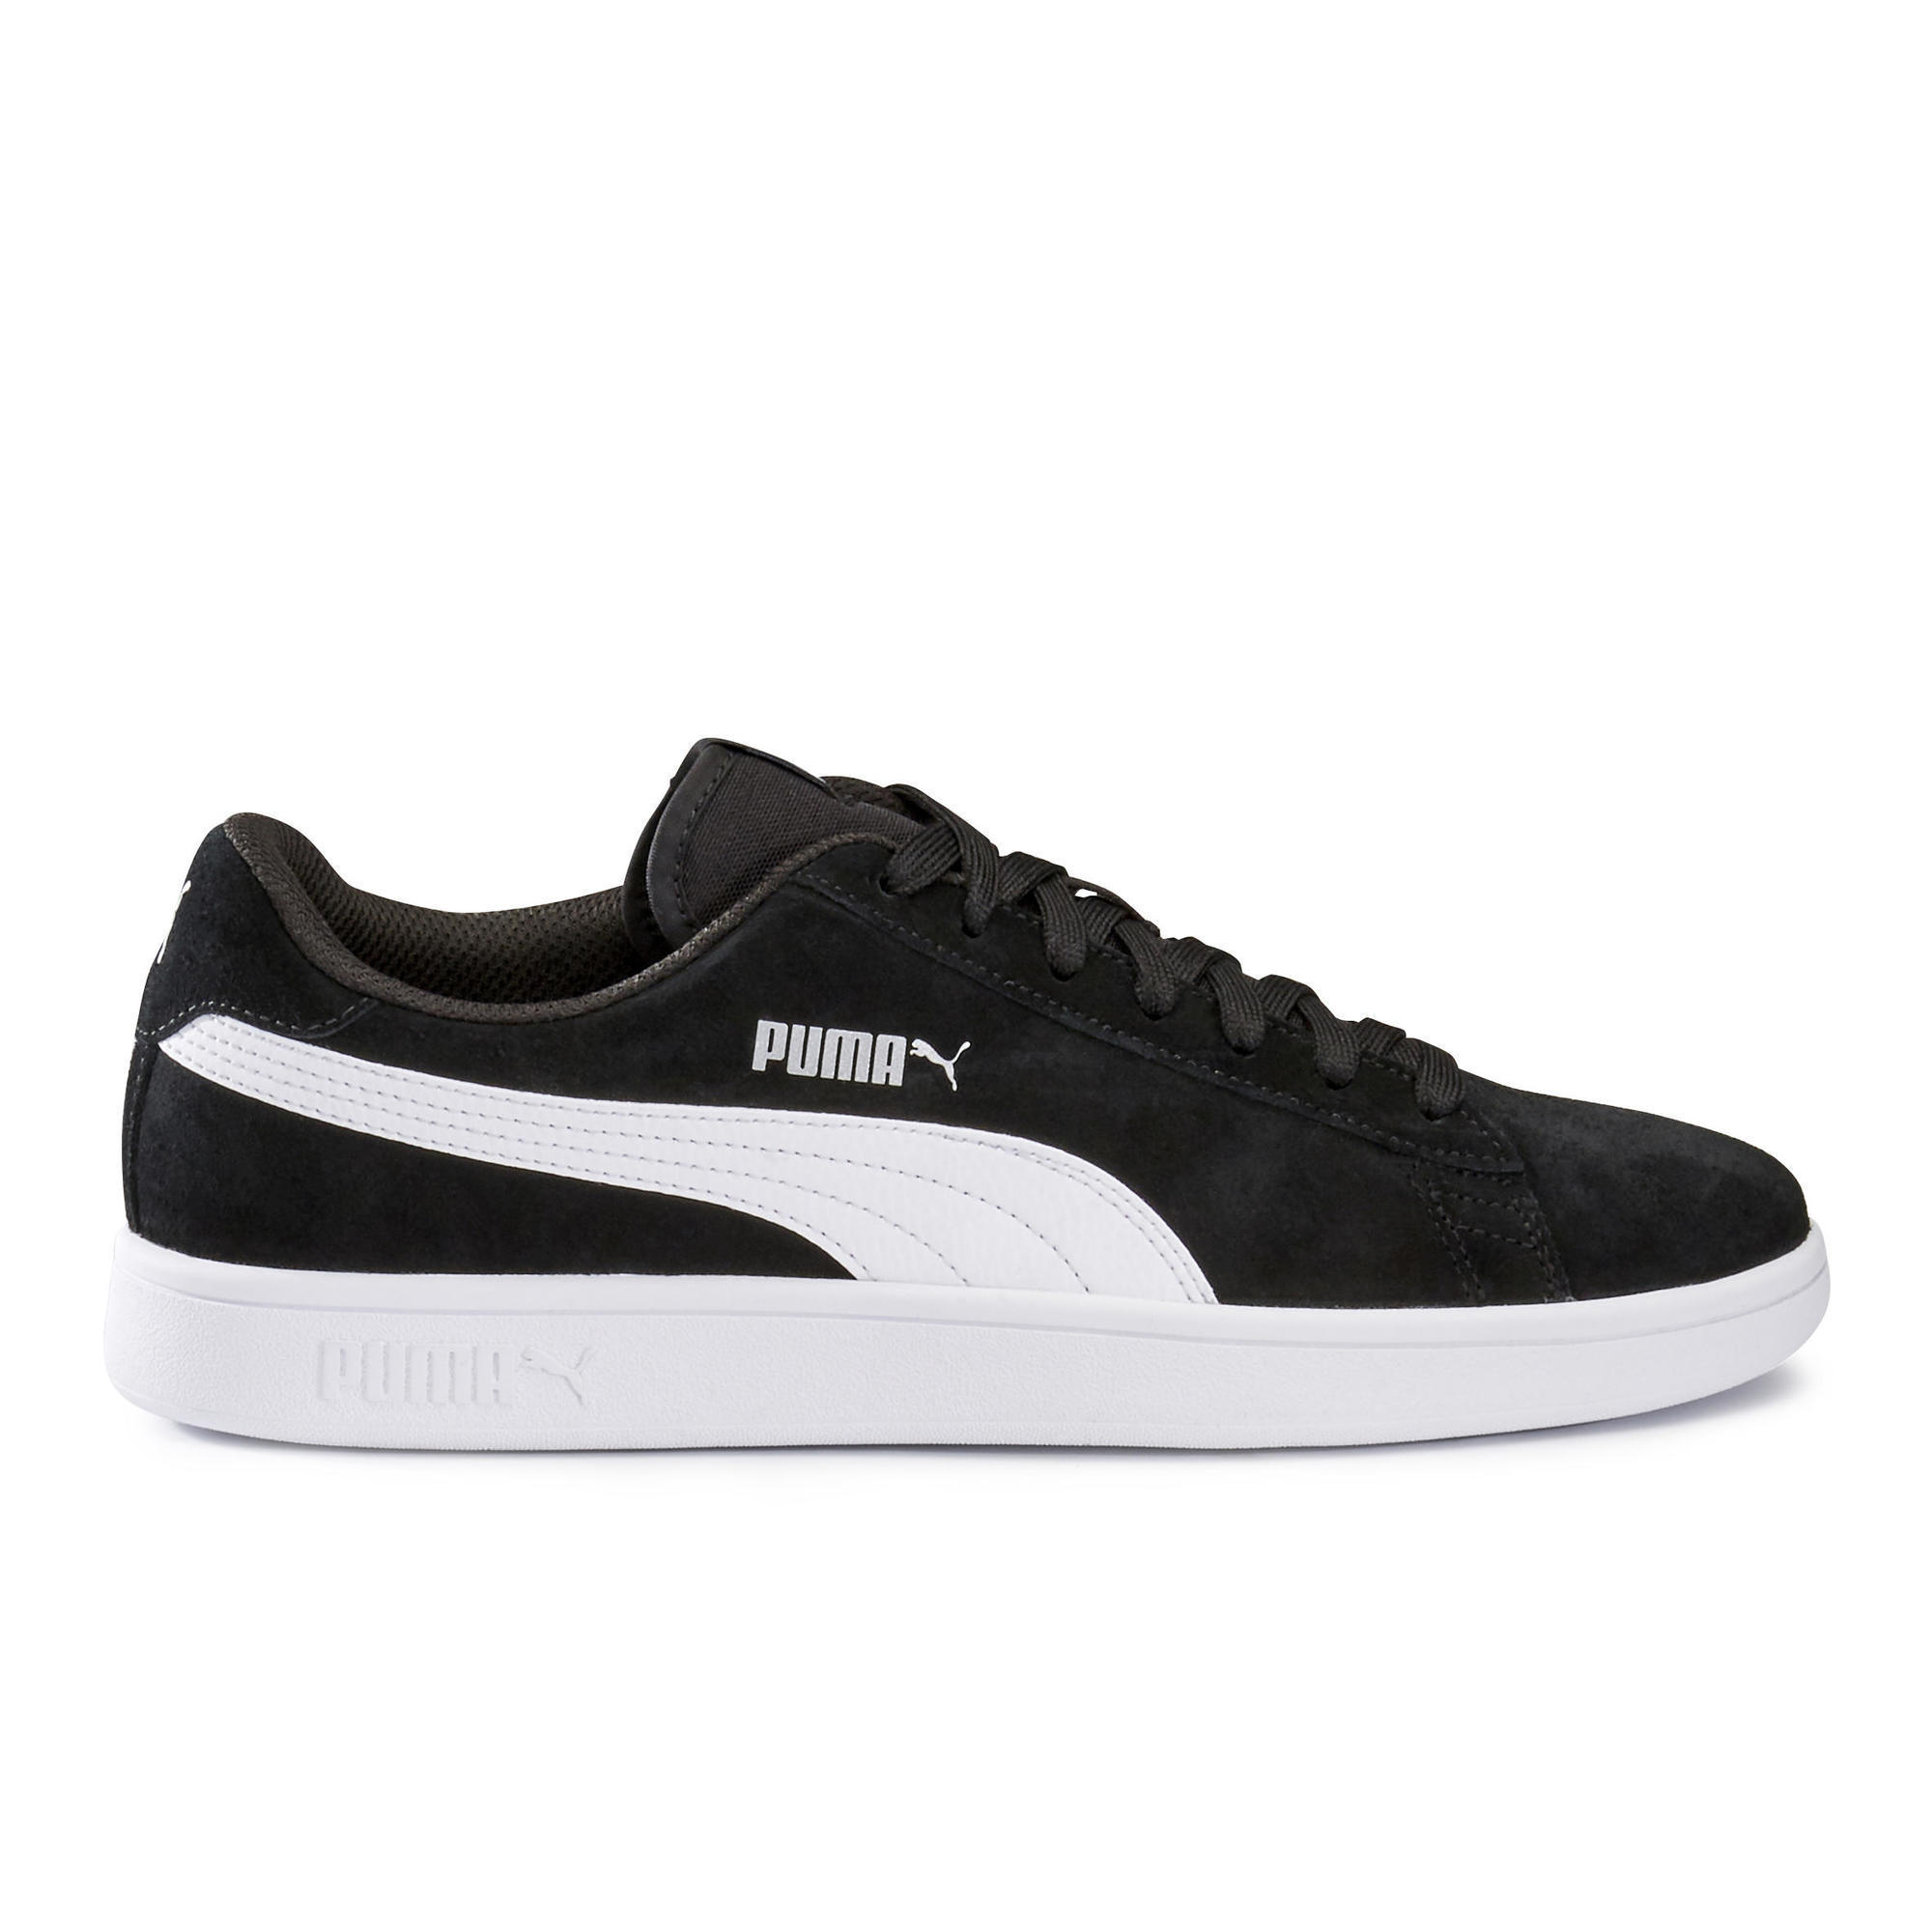 chaussures homme puma